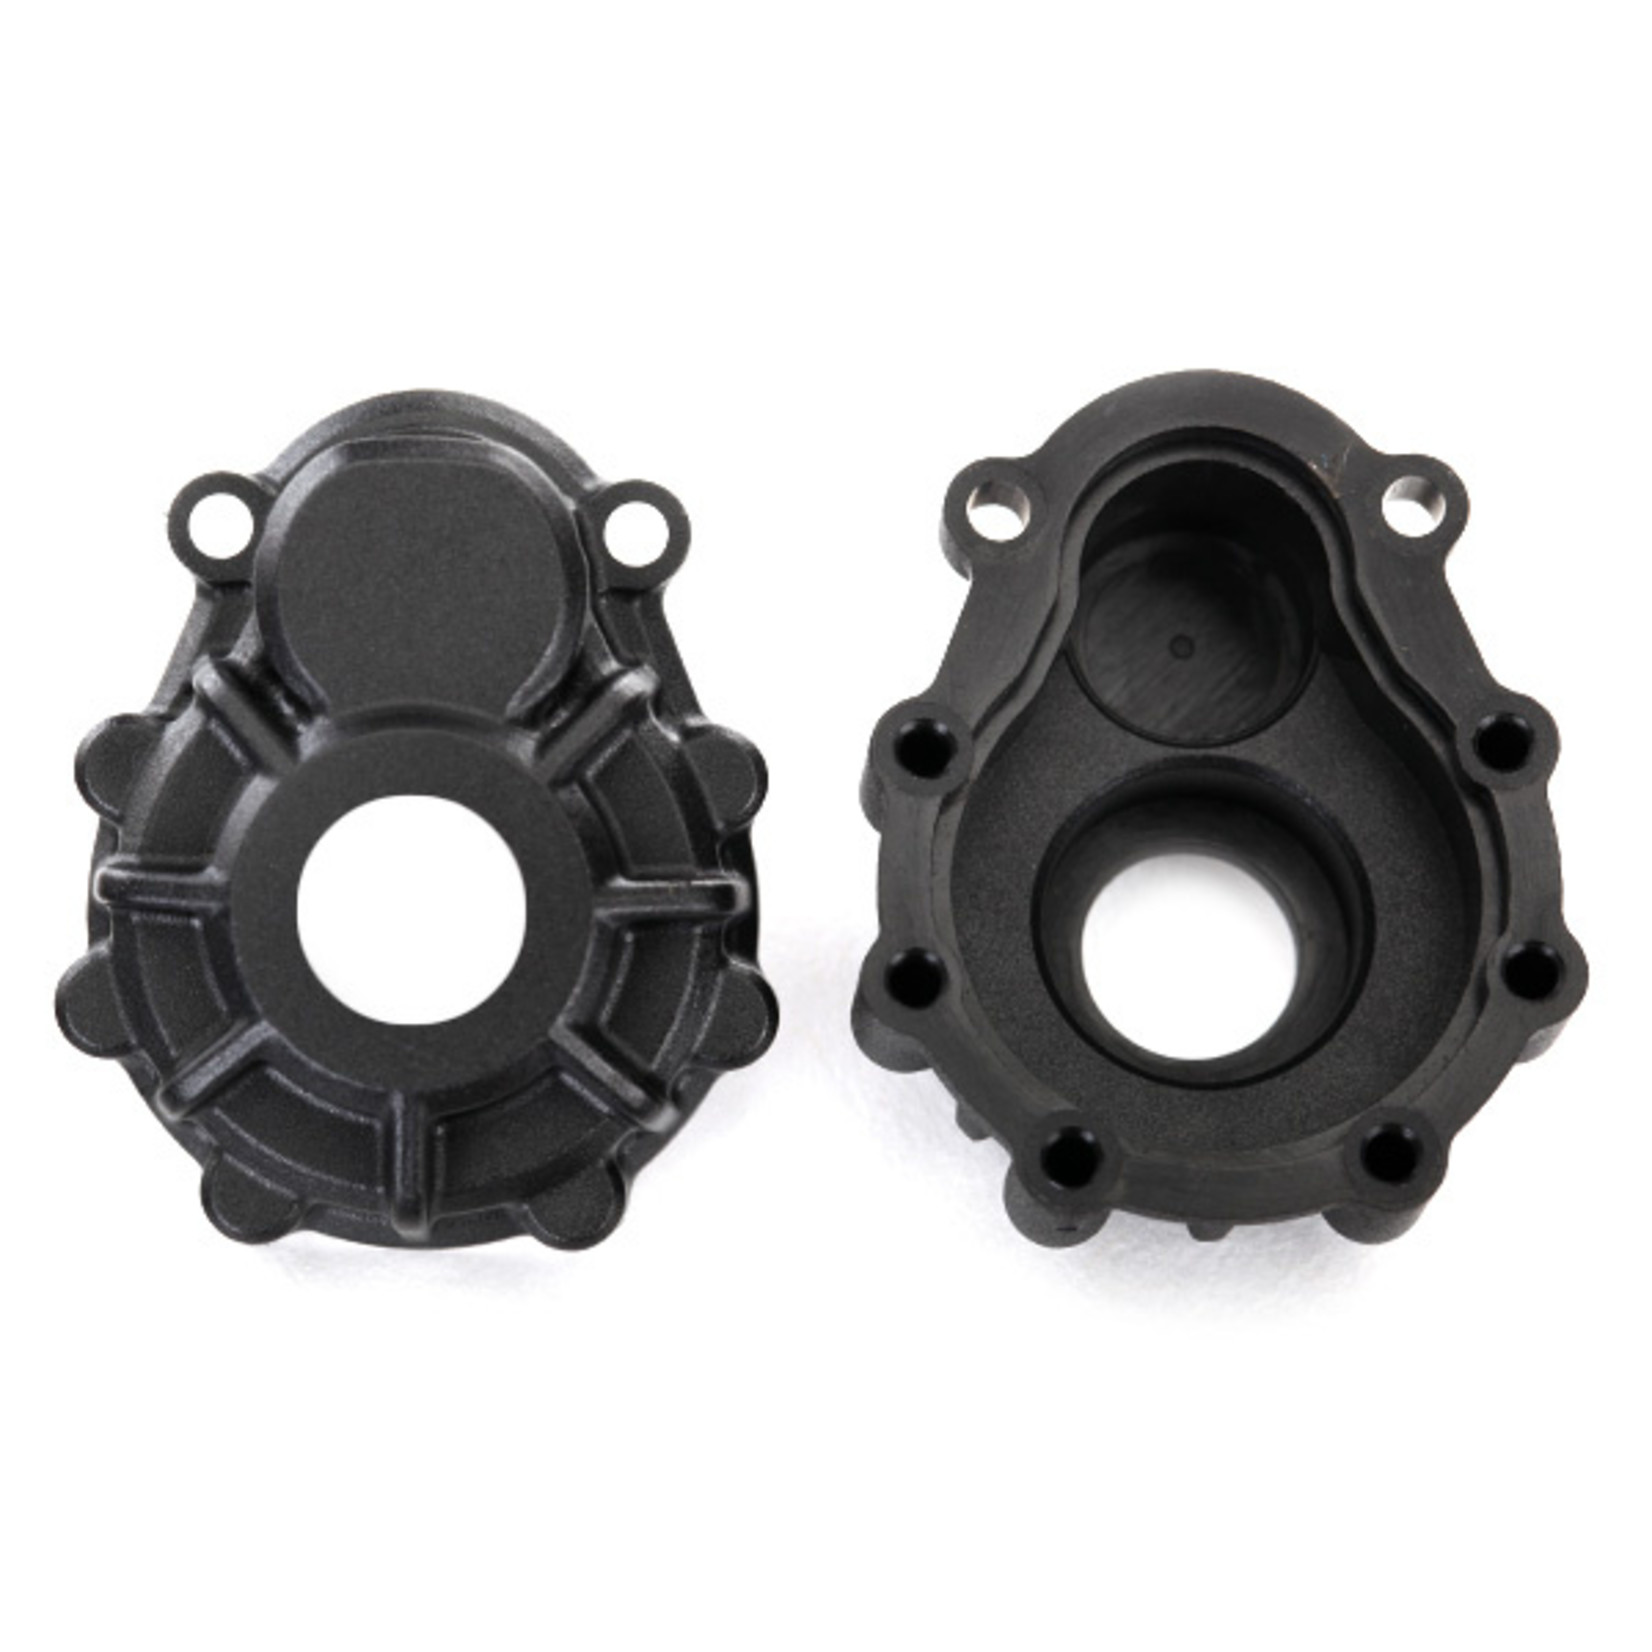 Traxxas 8251 - Portal drive housing, outer (front or rear)